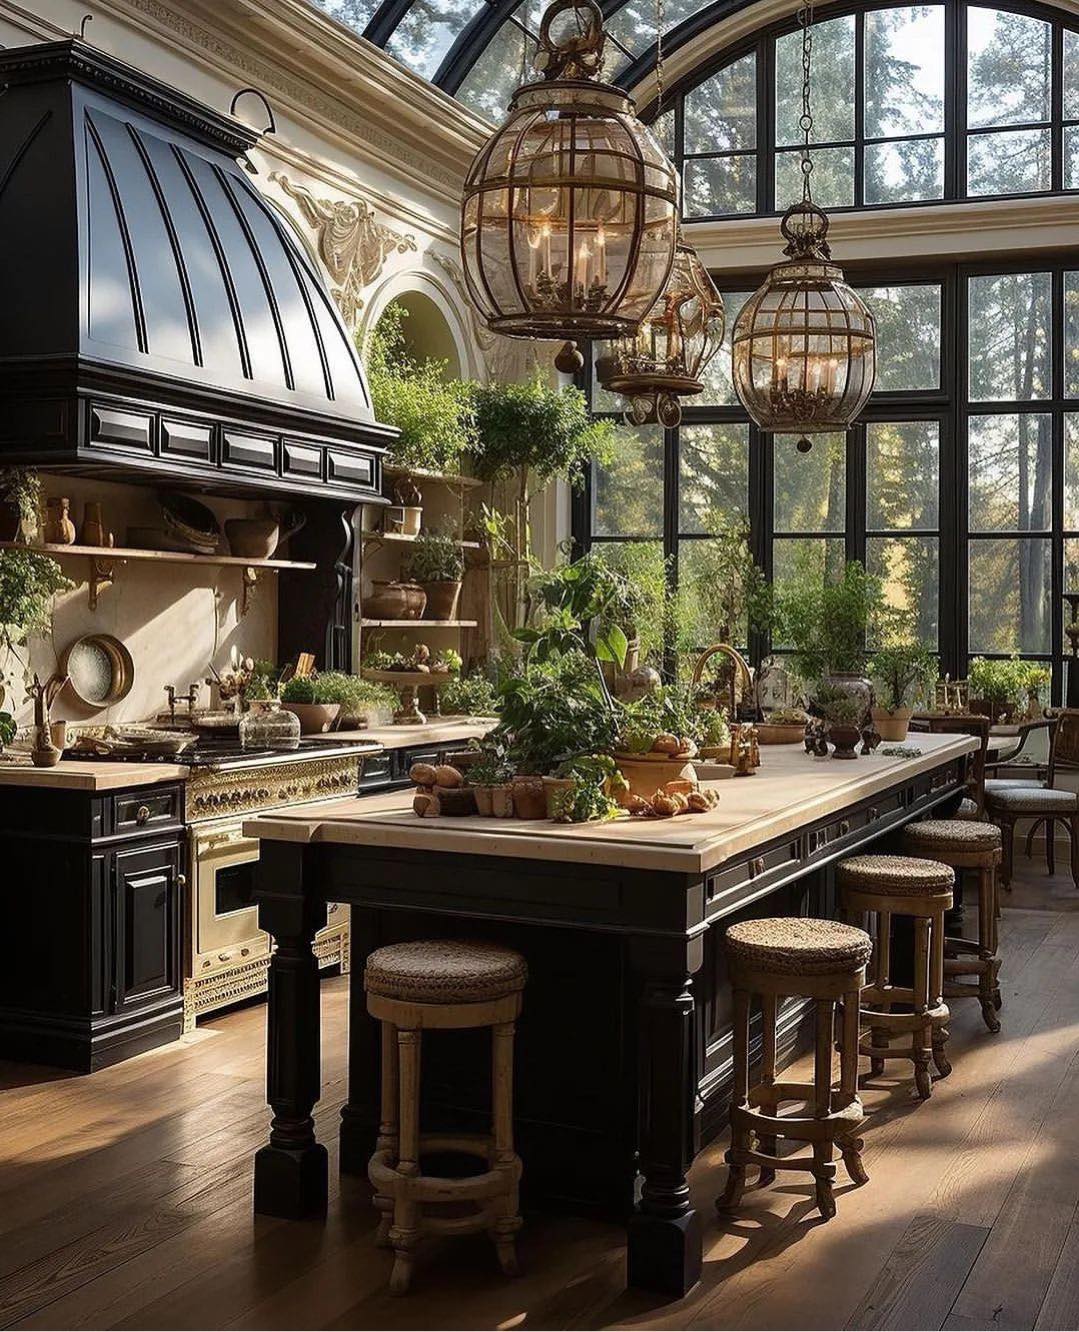 How to create a country kitchen – the key features